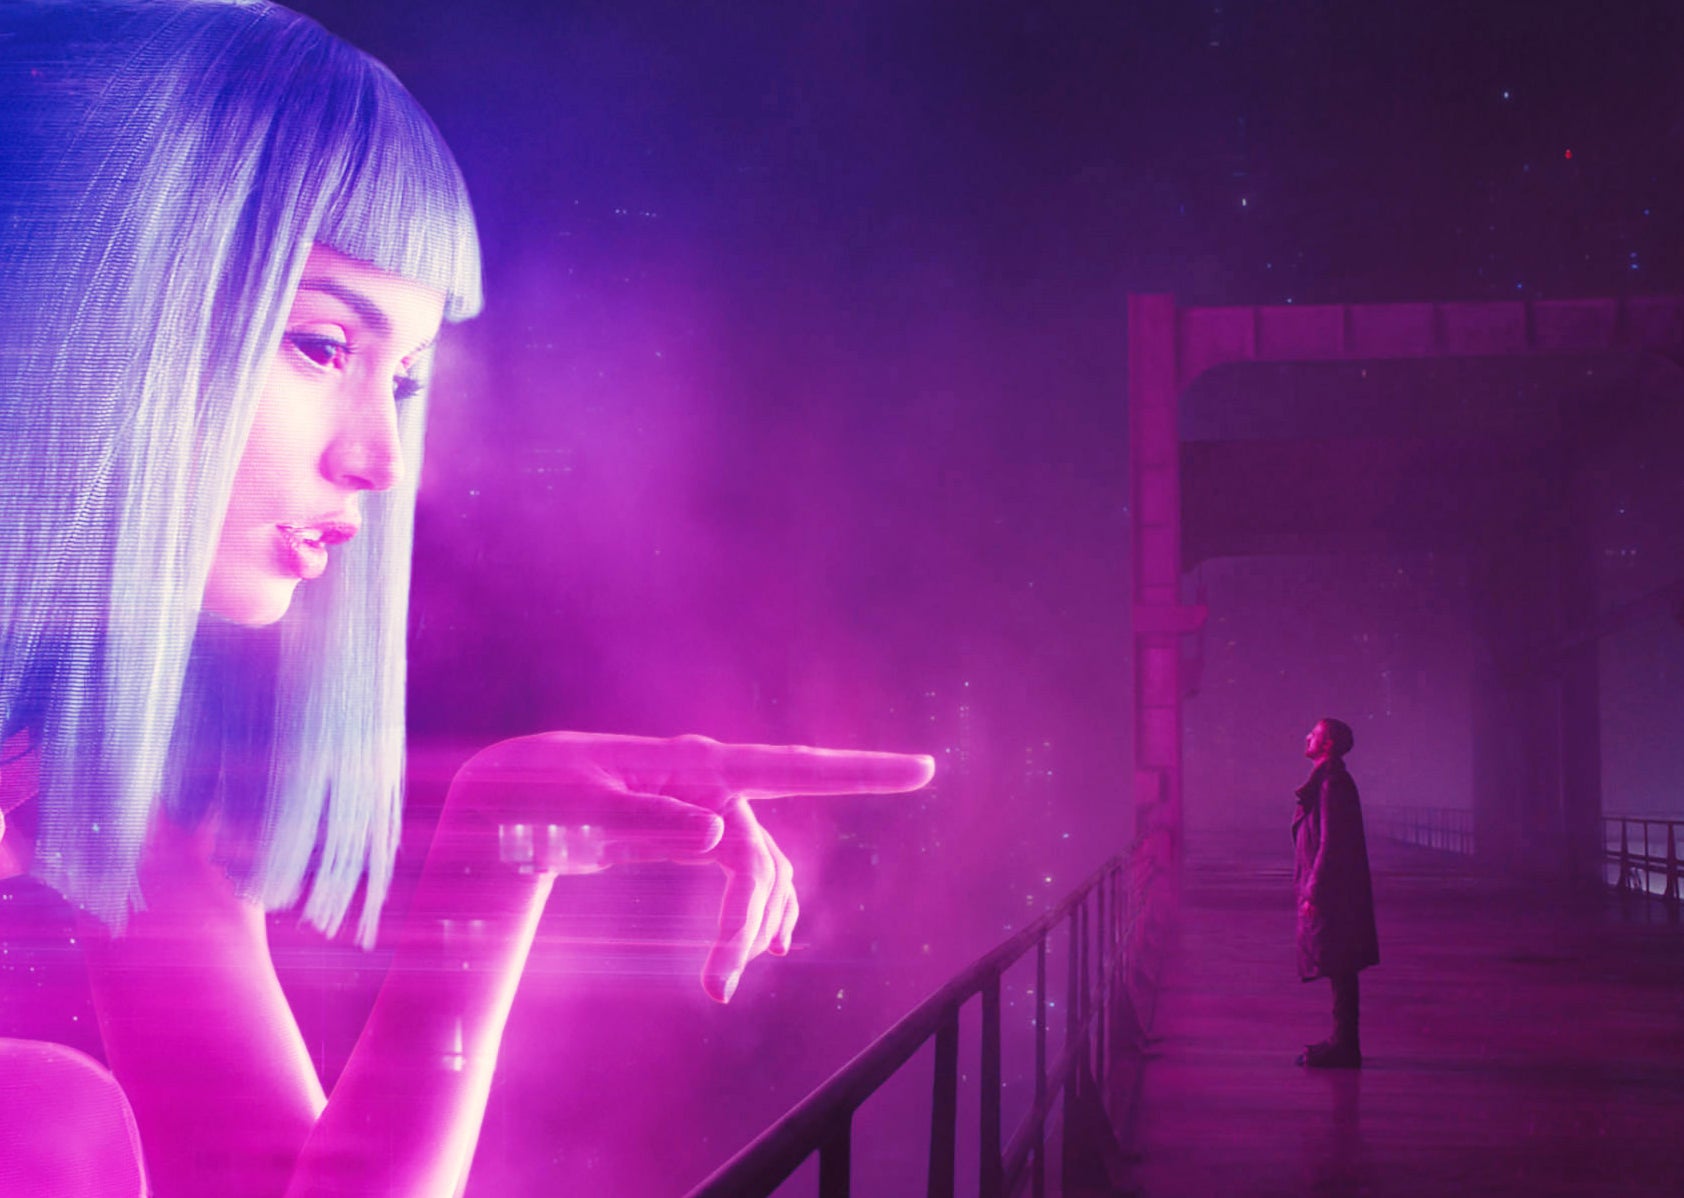 ana de armas as joi in blade runner 2049 with shoulder length solid blue hair with bangs